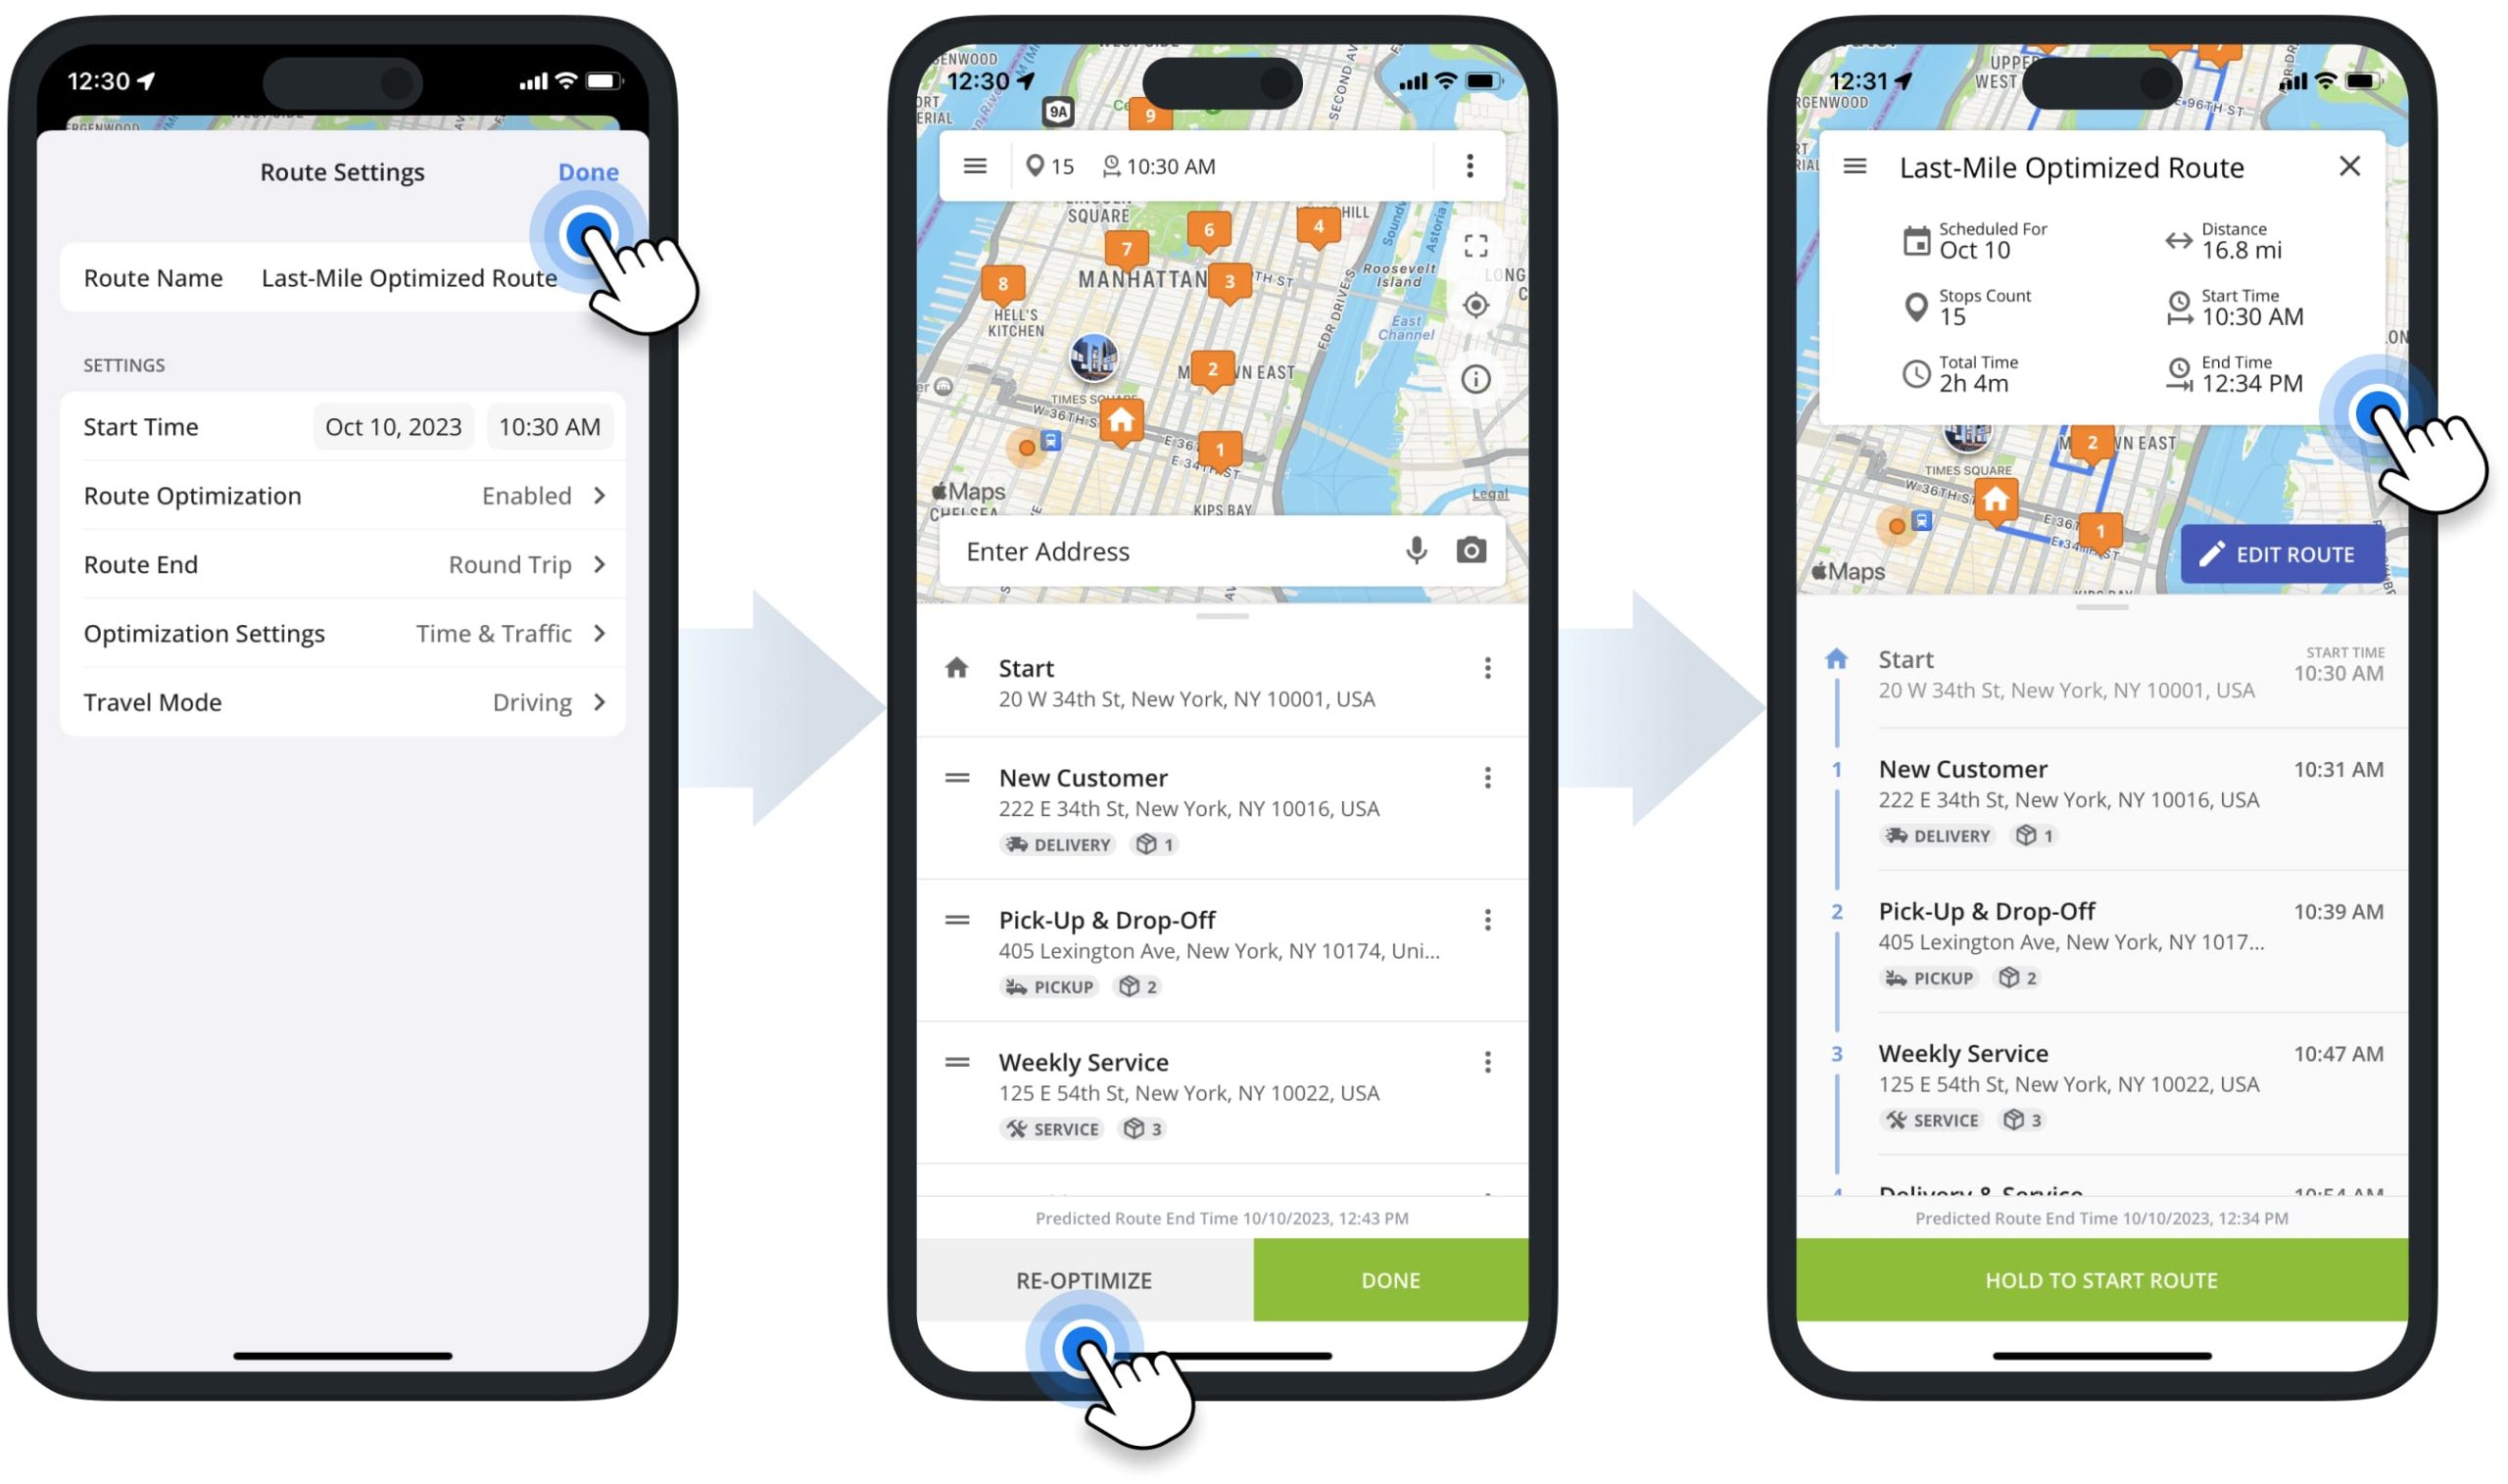 Re-optimize routes and resequence stops using Route4Me's iOS Multi-Addrtess Route Planning app for last-mile delivery drivers and field service.